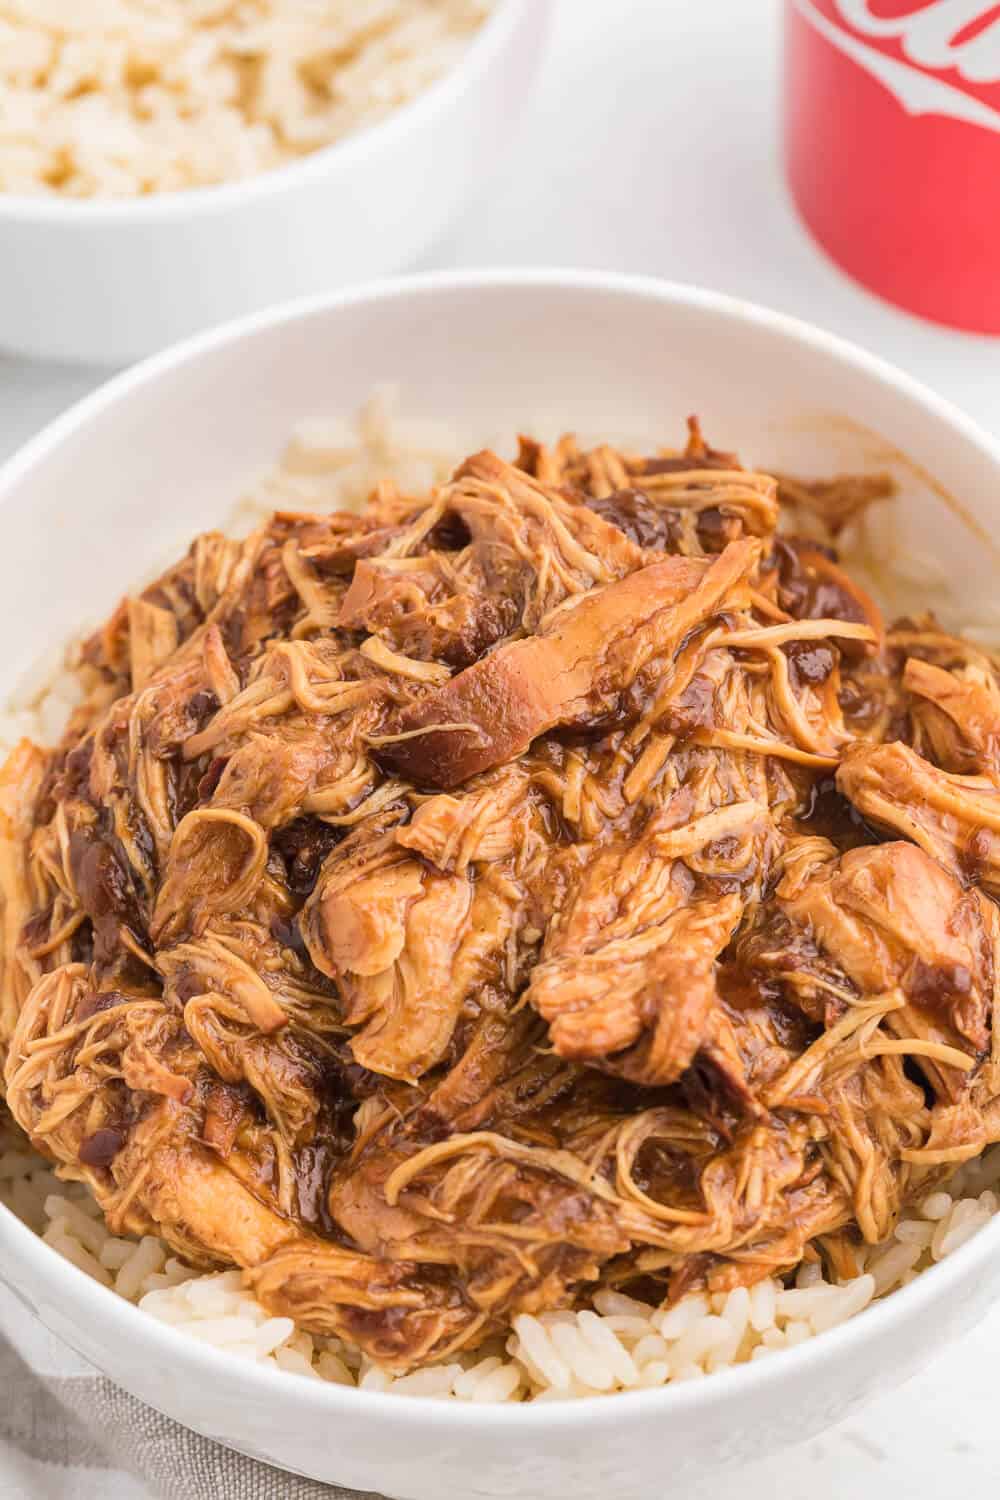 Cherry Coke Chicken - The easiest sweet and savory chicken recipe! Add some soda to your Crockpot for the most tender barbecue chicken breasts.